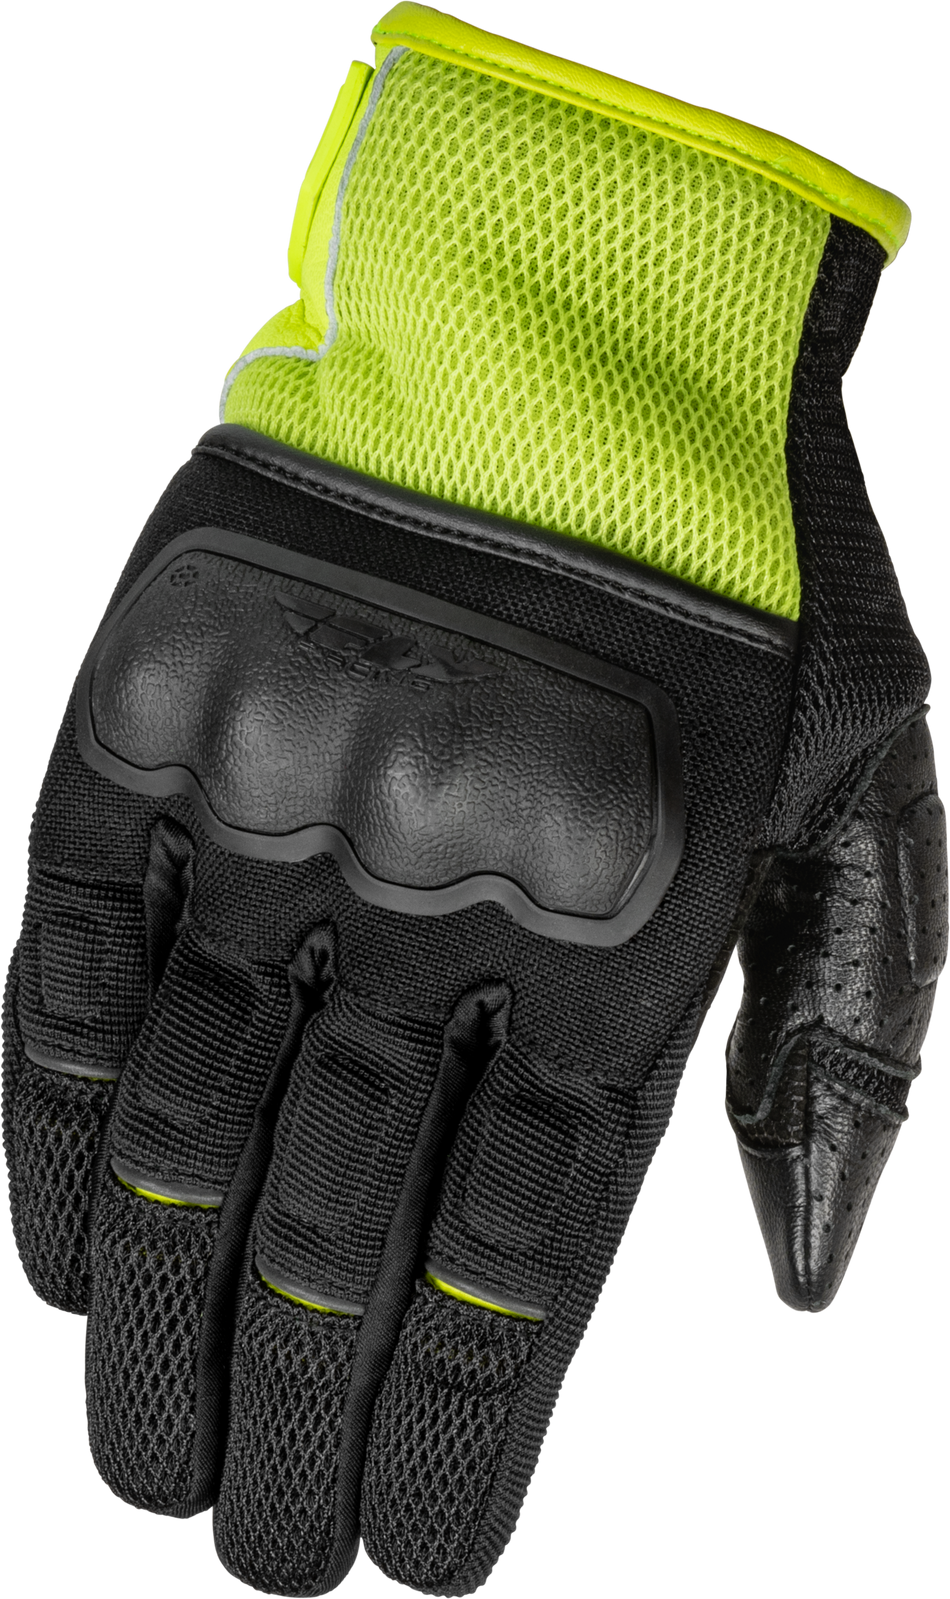 FLY RACING Coolpro Force Gloves Black/Hi-Vis 3x 476-41283X